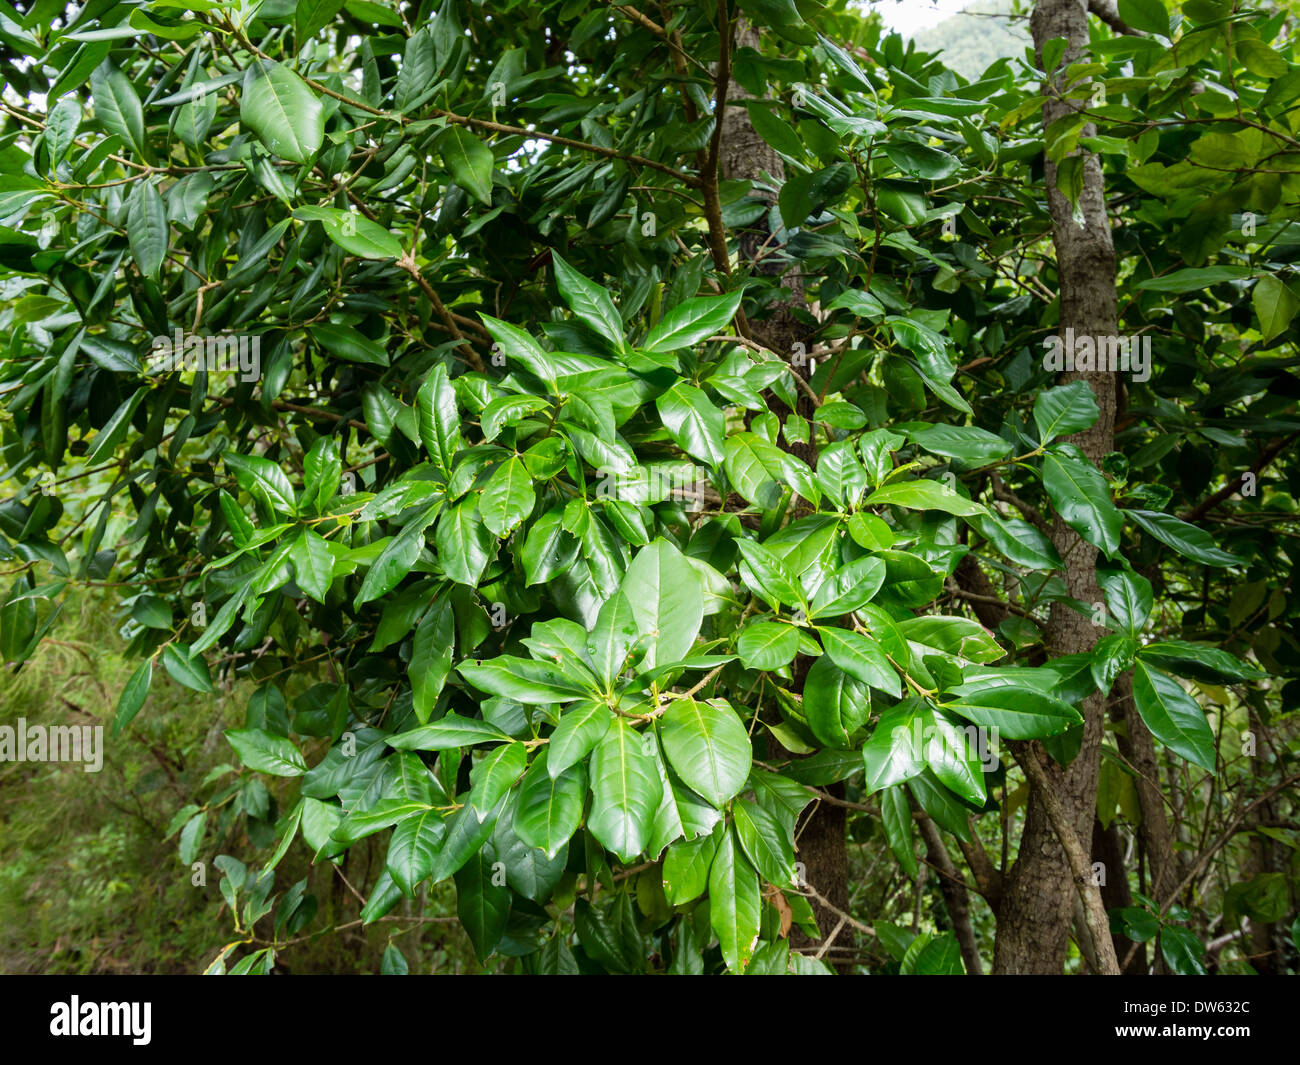 Laurel leaves grow in the laurel forest of Los Tiles / Los Tilos on the Canary Island of La Palma. Stock Photo